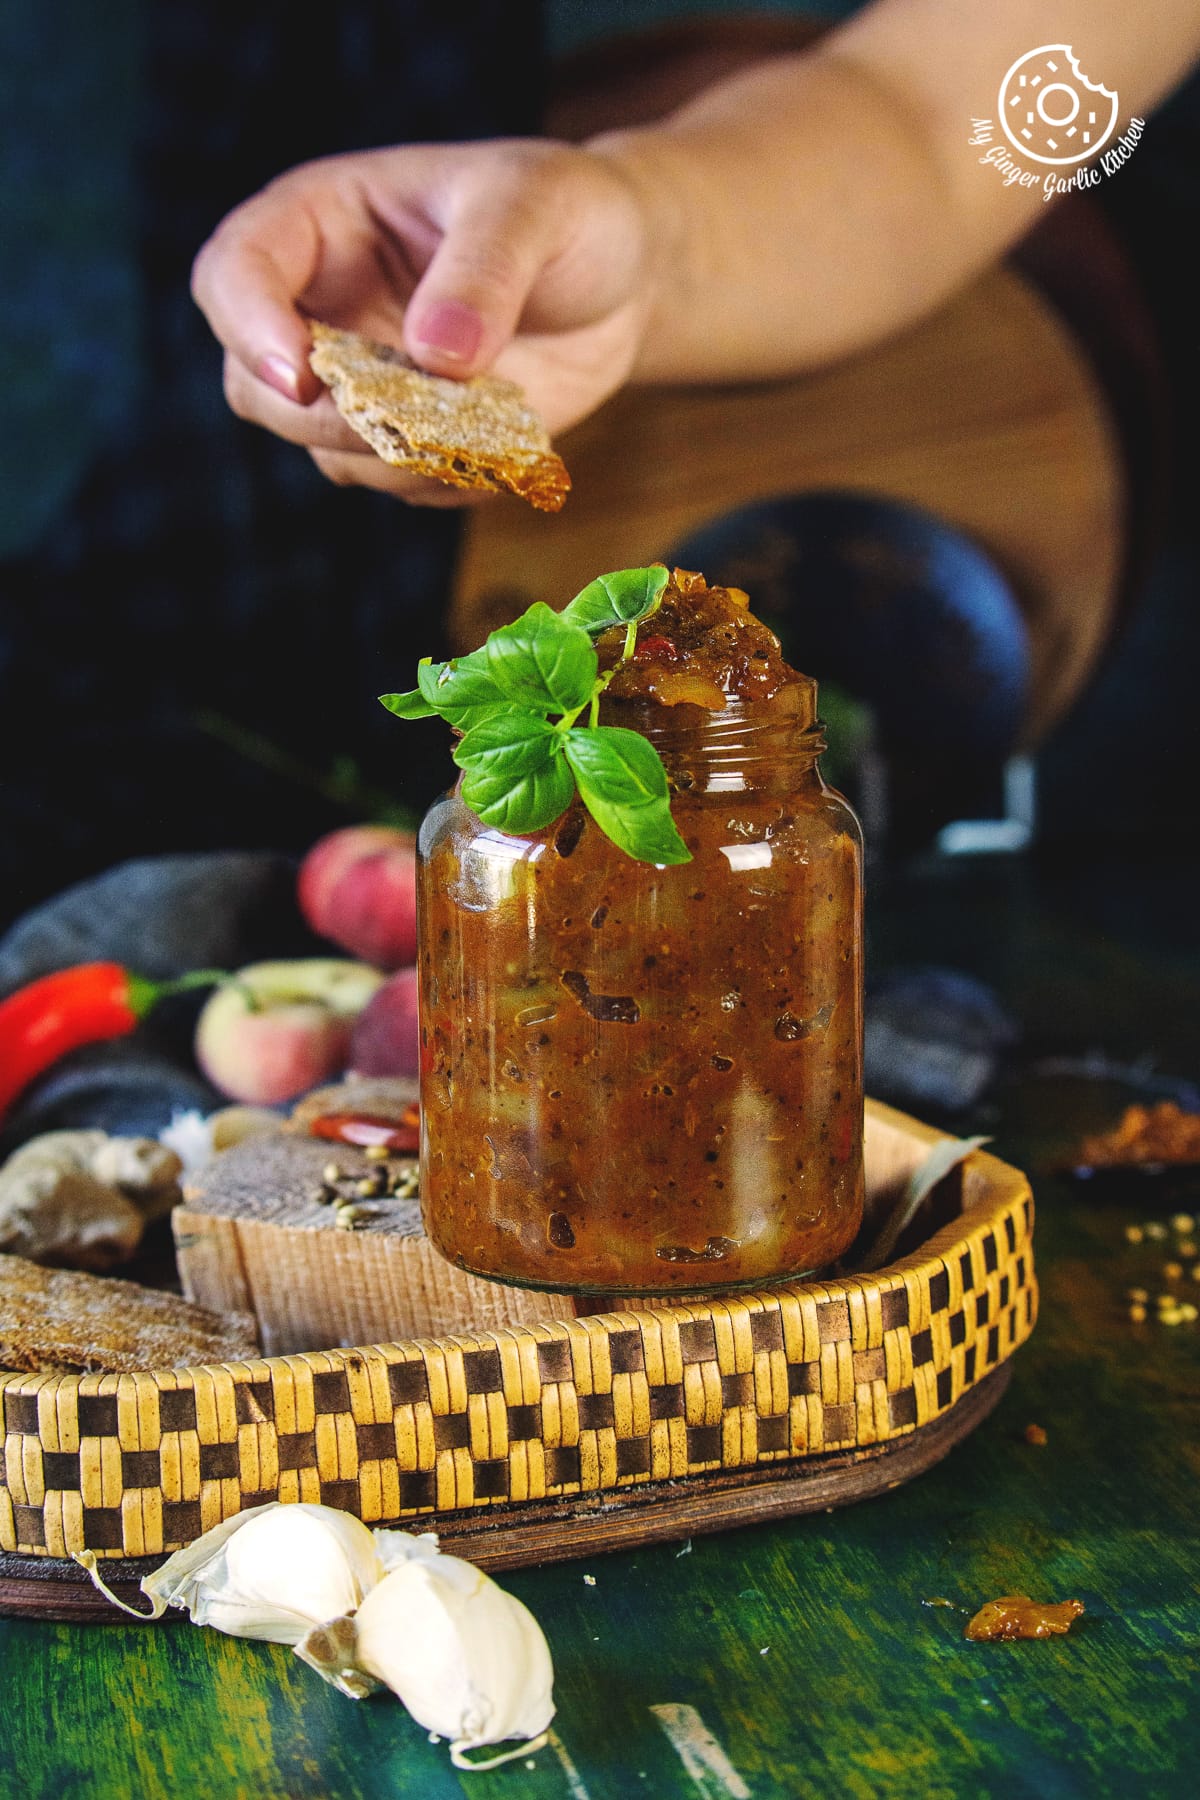 peach chutney in a glass jar and a hand in background